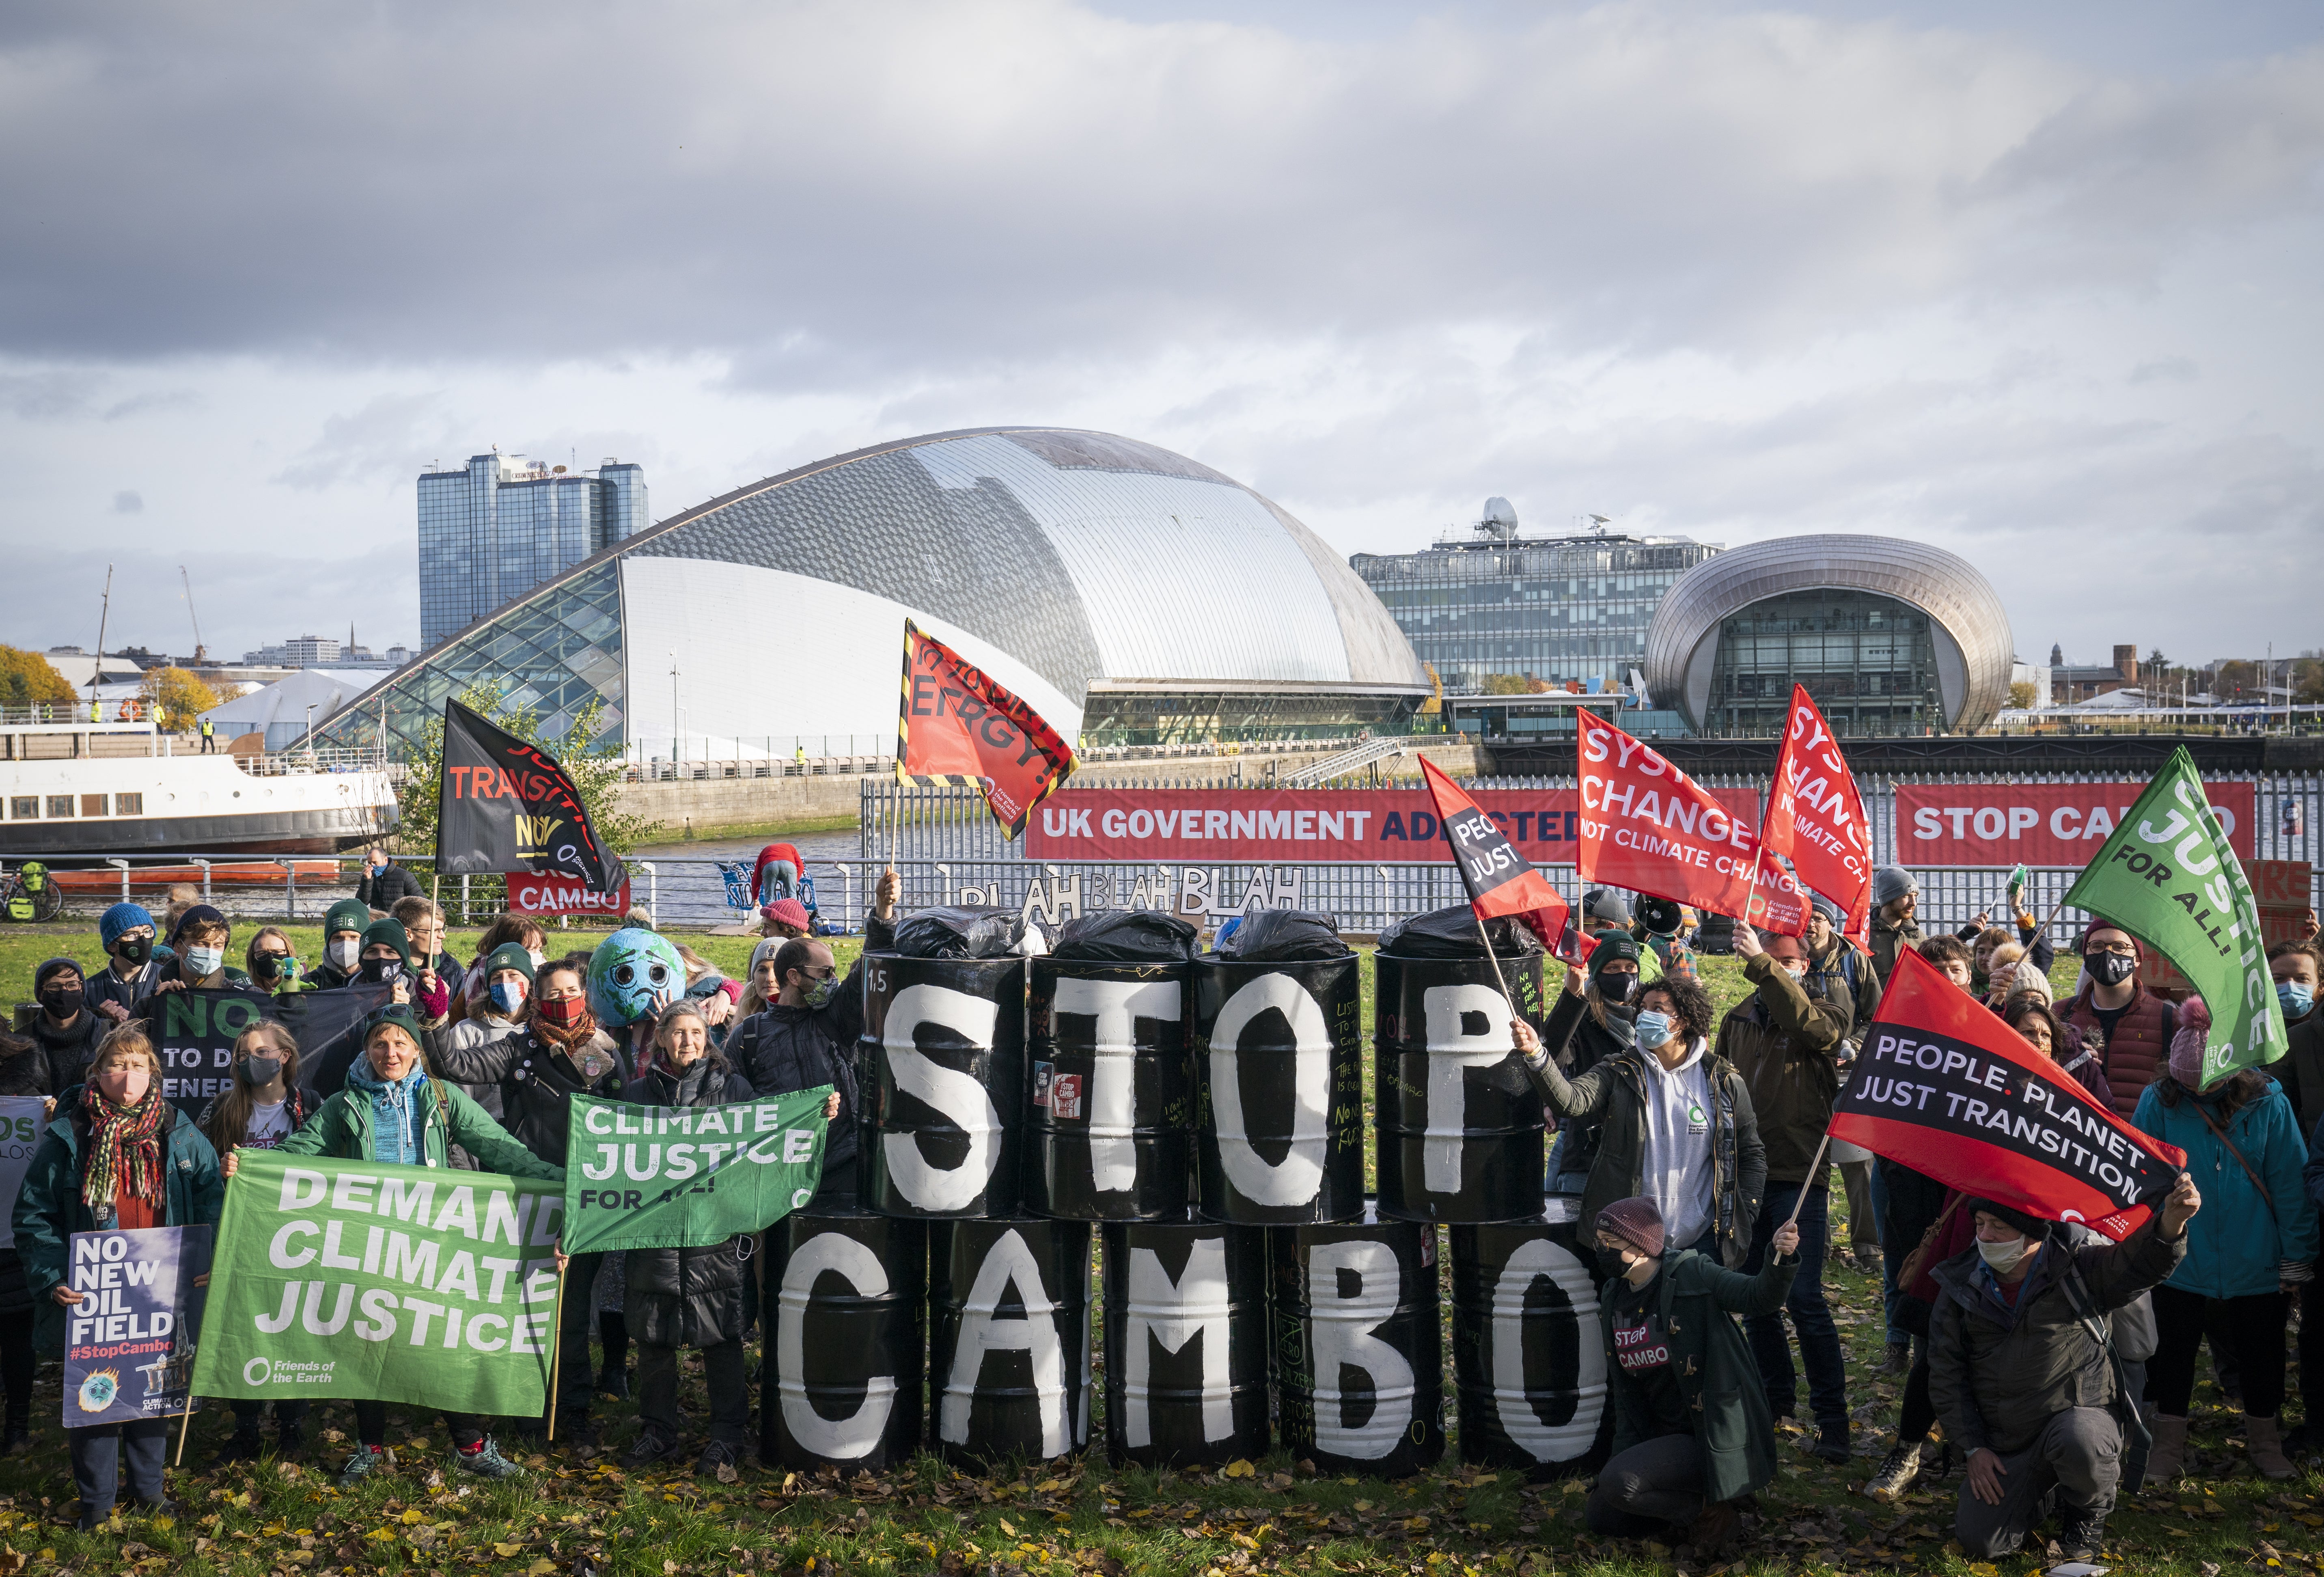 Friends of the Earth protesting against Cambo at Cop26